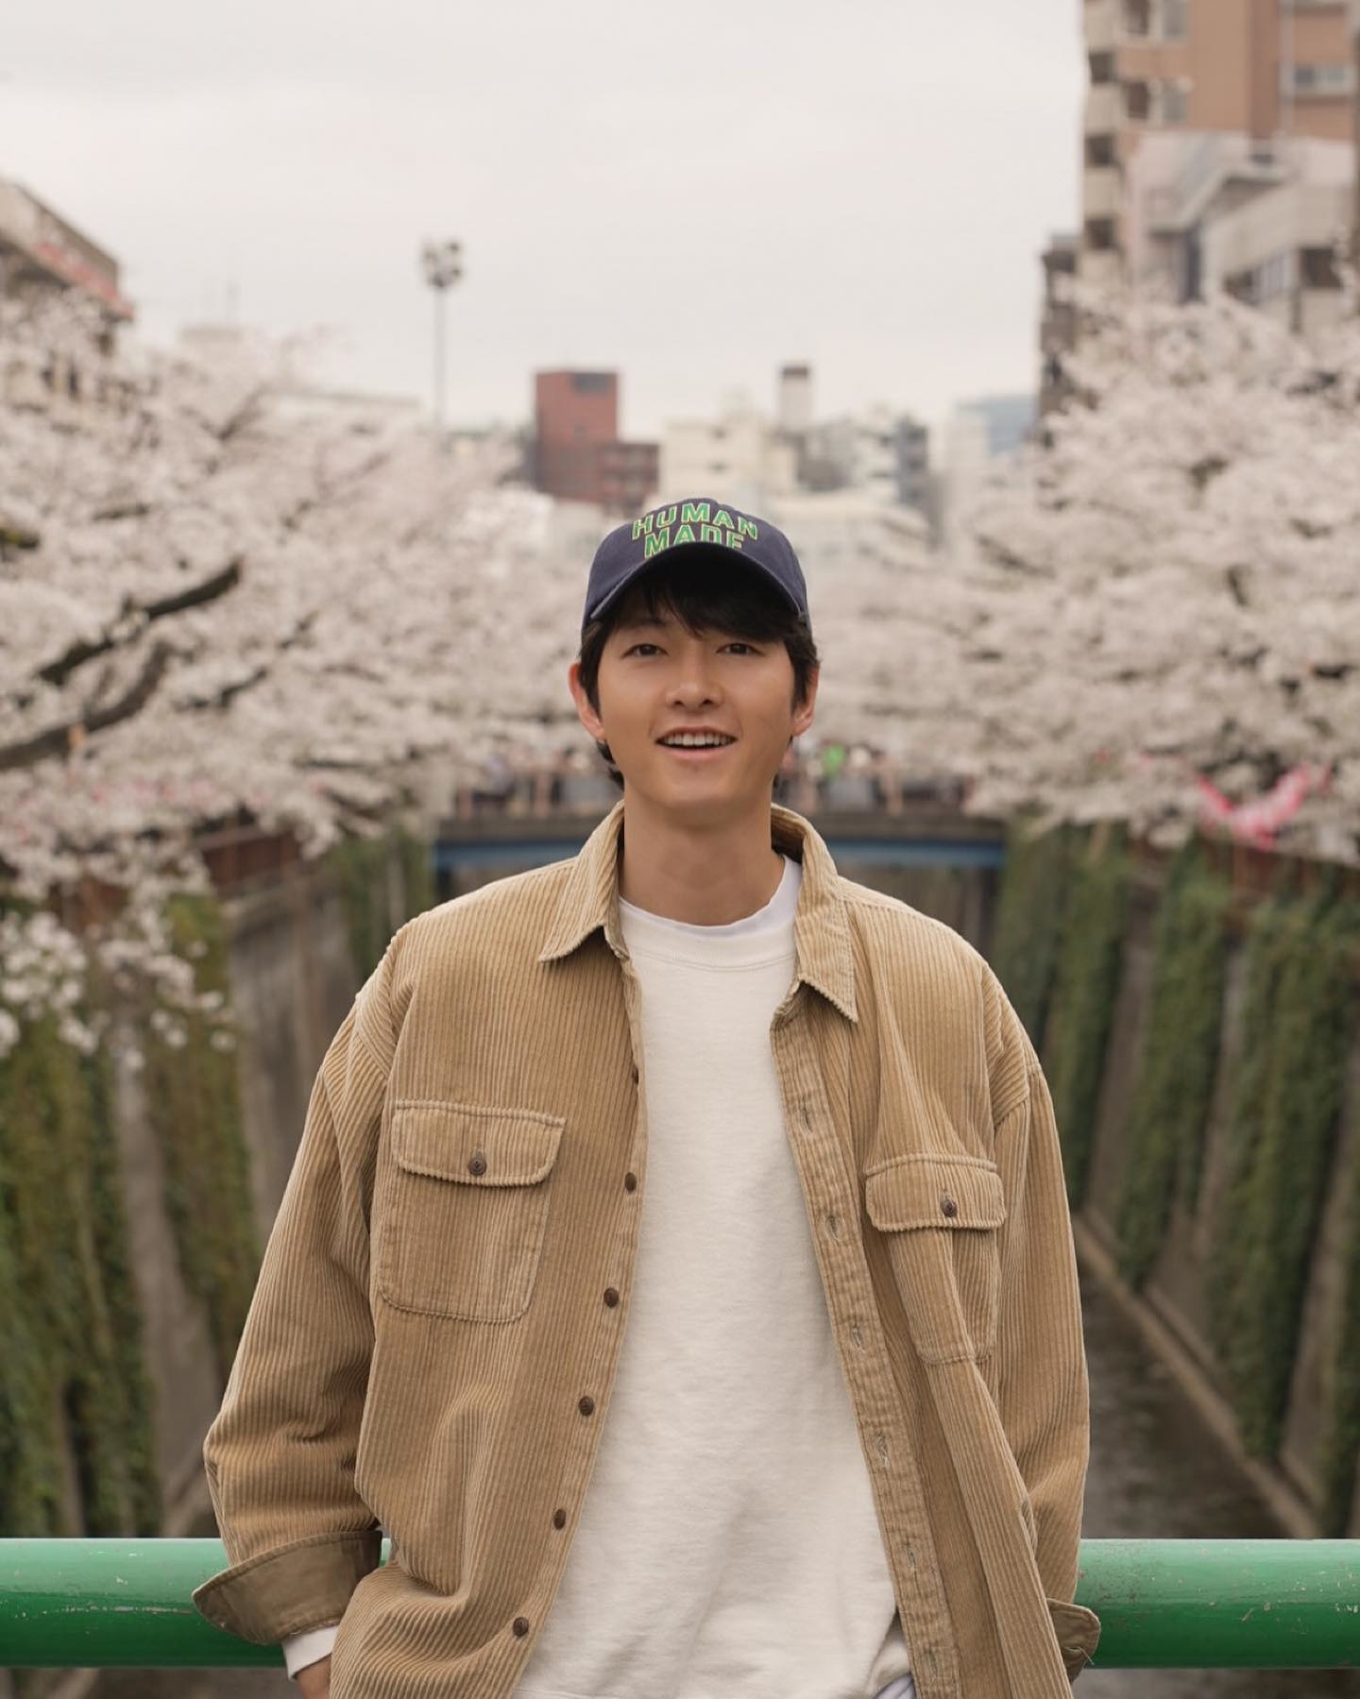 Blooming cherry blossoms attract Asian celebrities to Japan